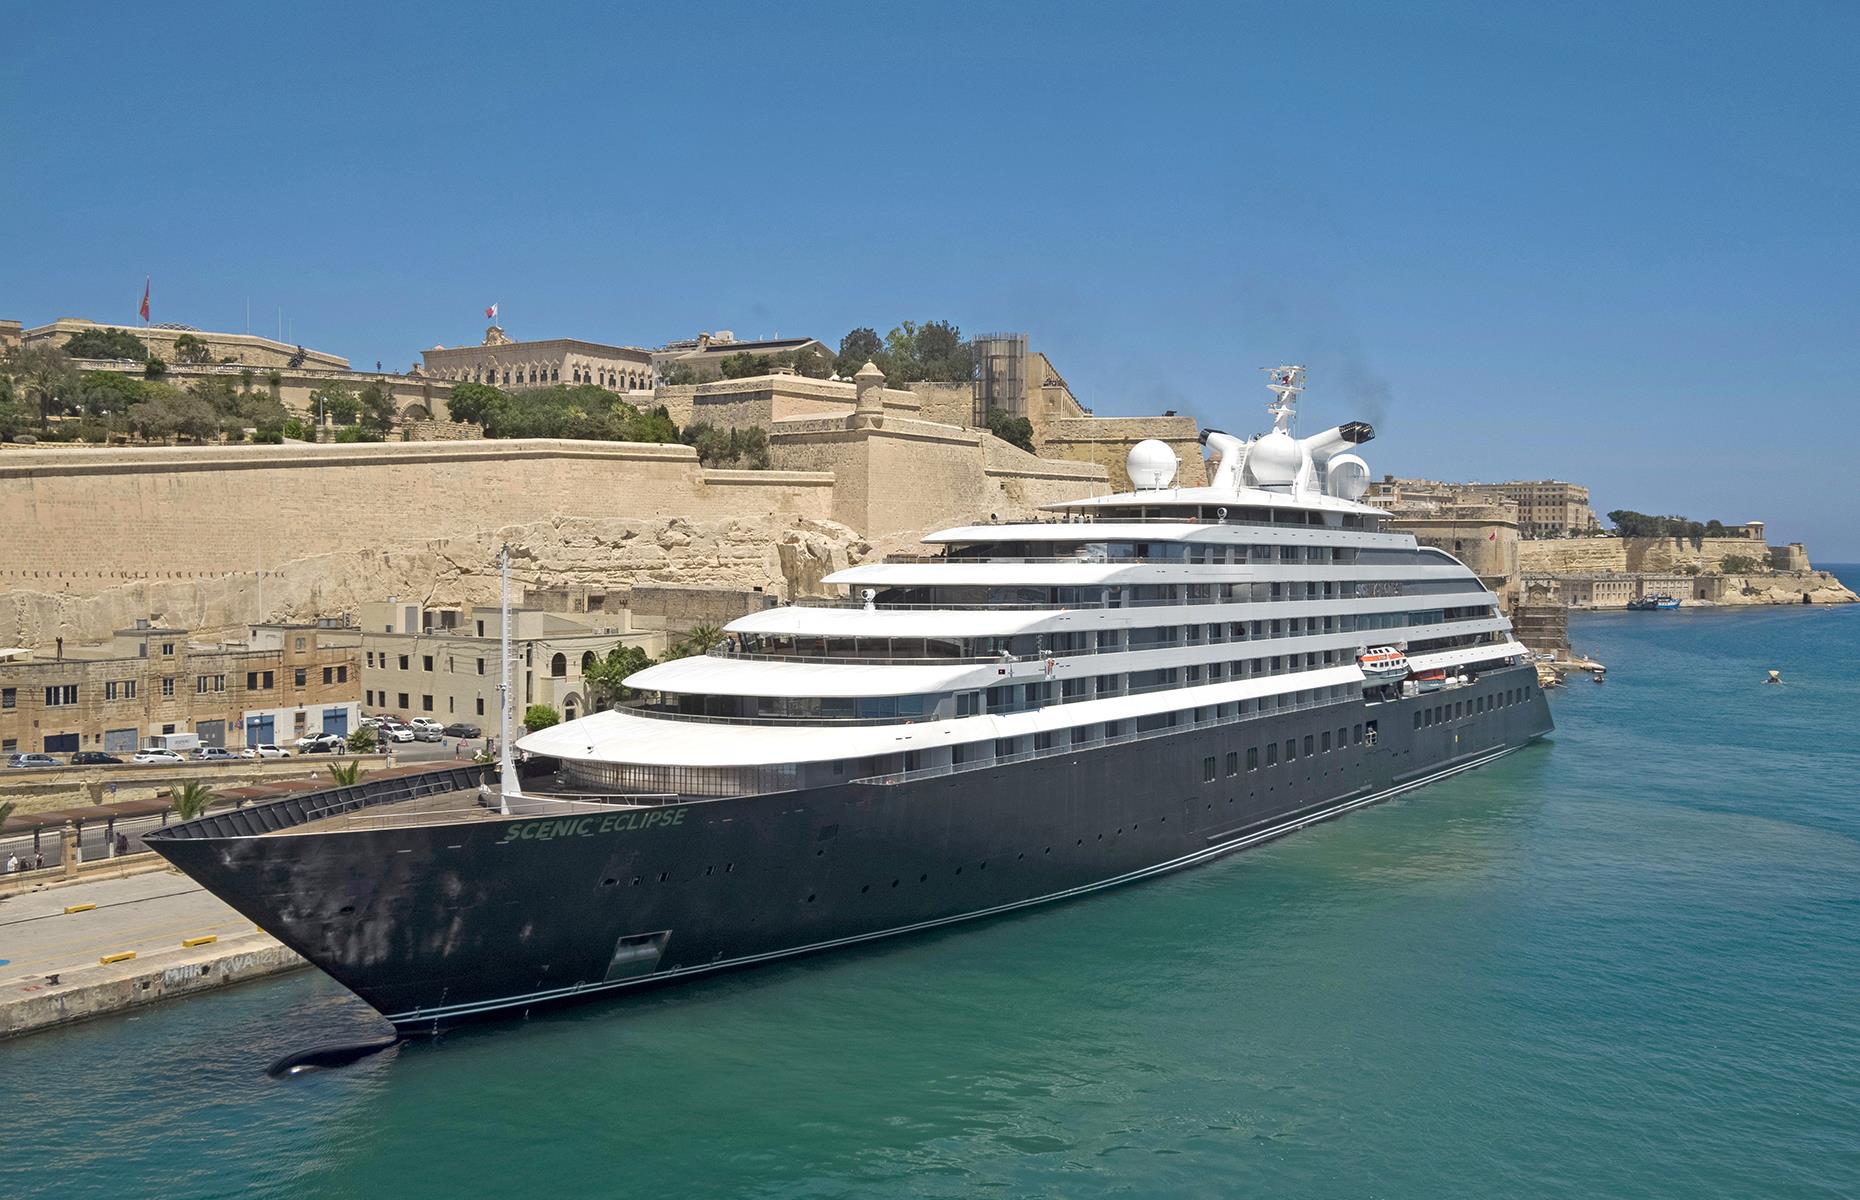 One of the best examples is Scenic Cruises. Book a sailing with this luxury cruise line and the fare includes absolutely everything, whether it’s international and internal flights or fine dining, butler service and excursions.